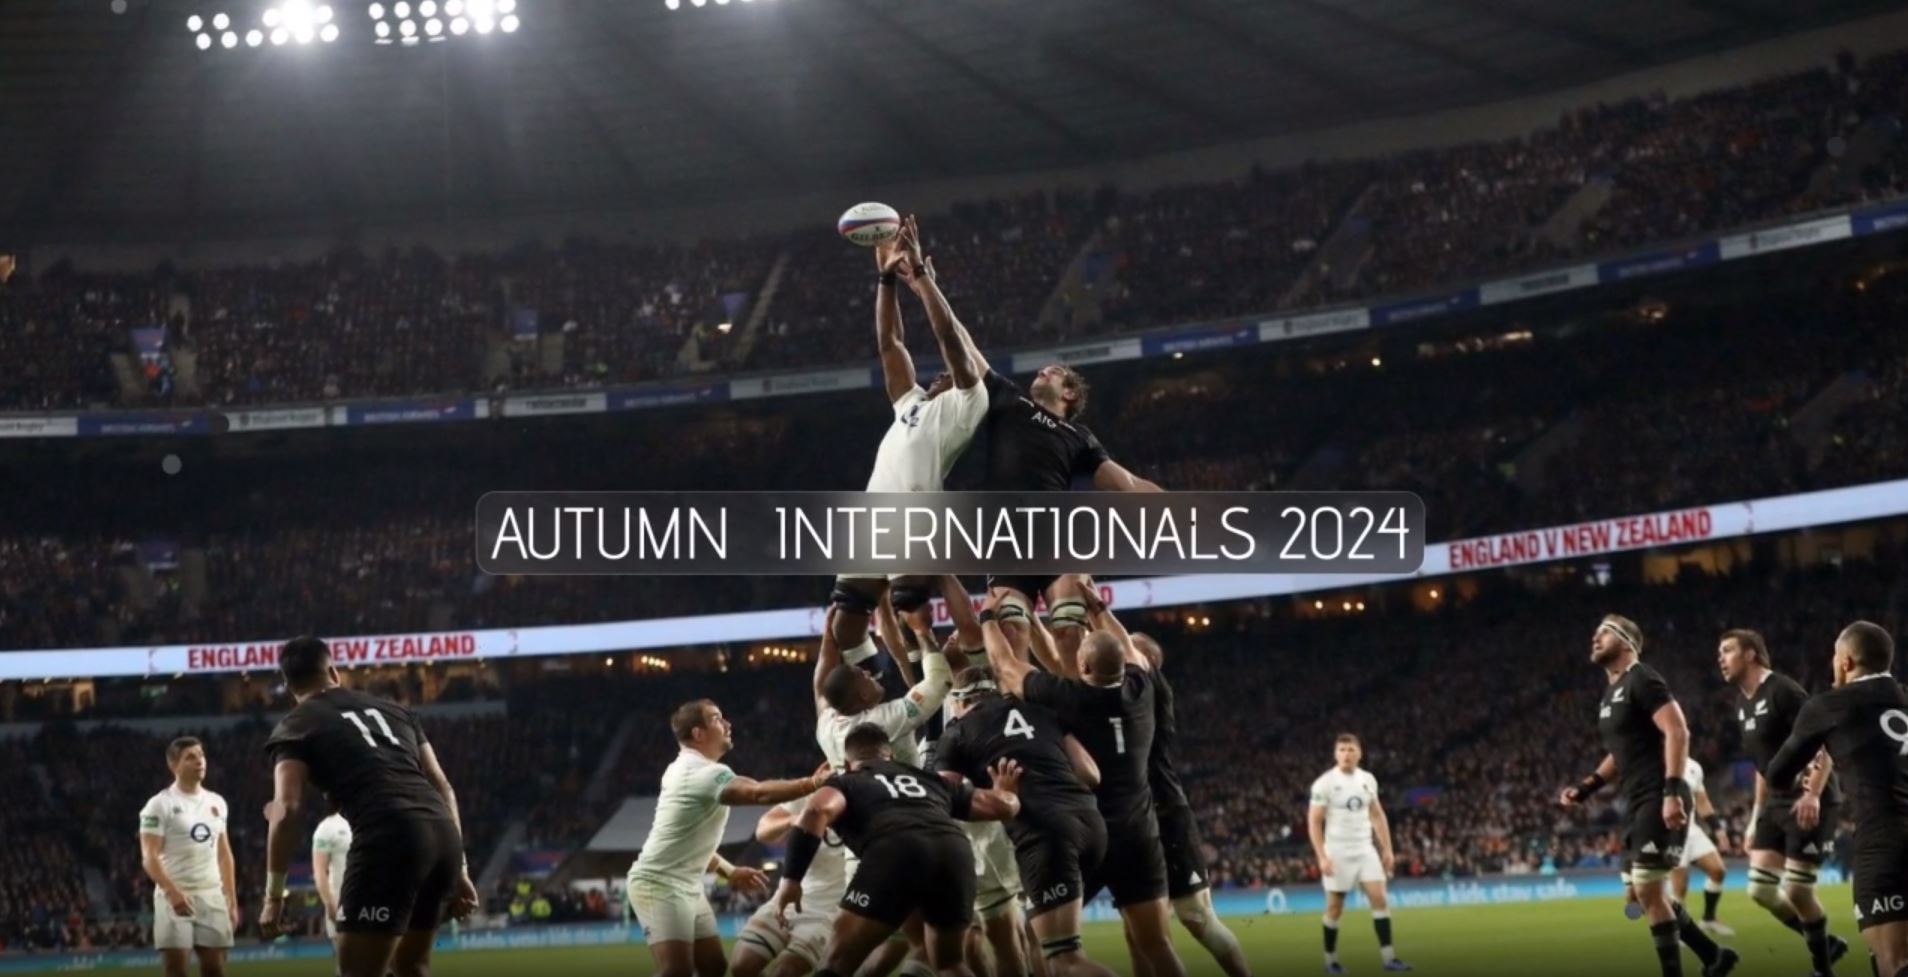 Buy vip tickets to all autumn internationals with Sincura, watch England play New Zealand, Australia and South Africa